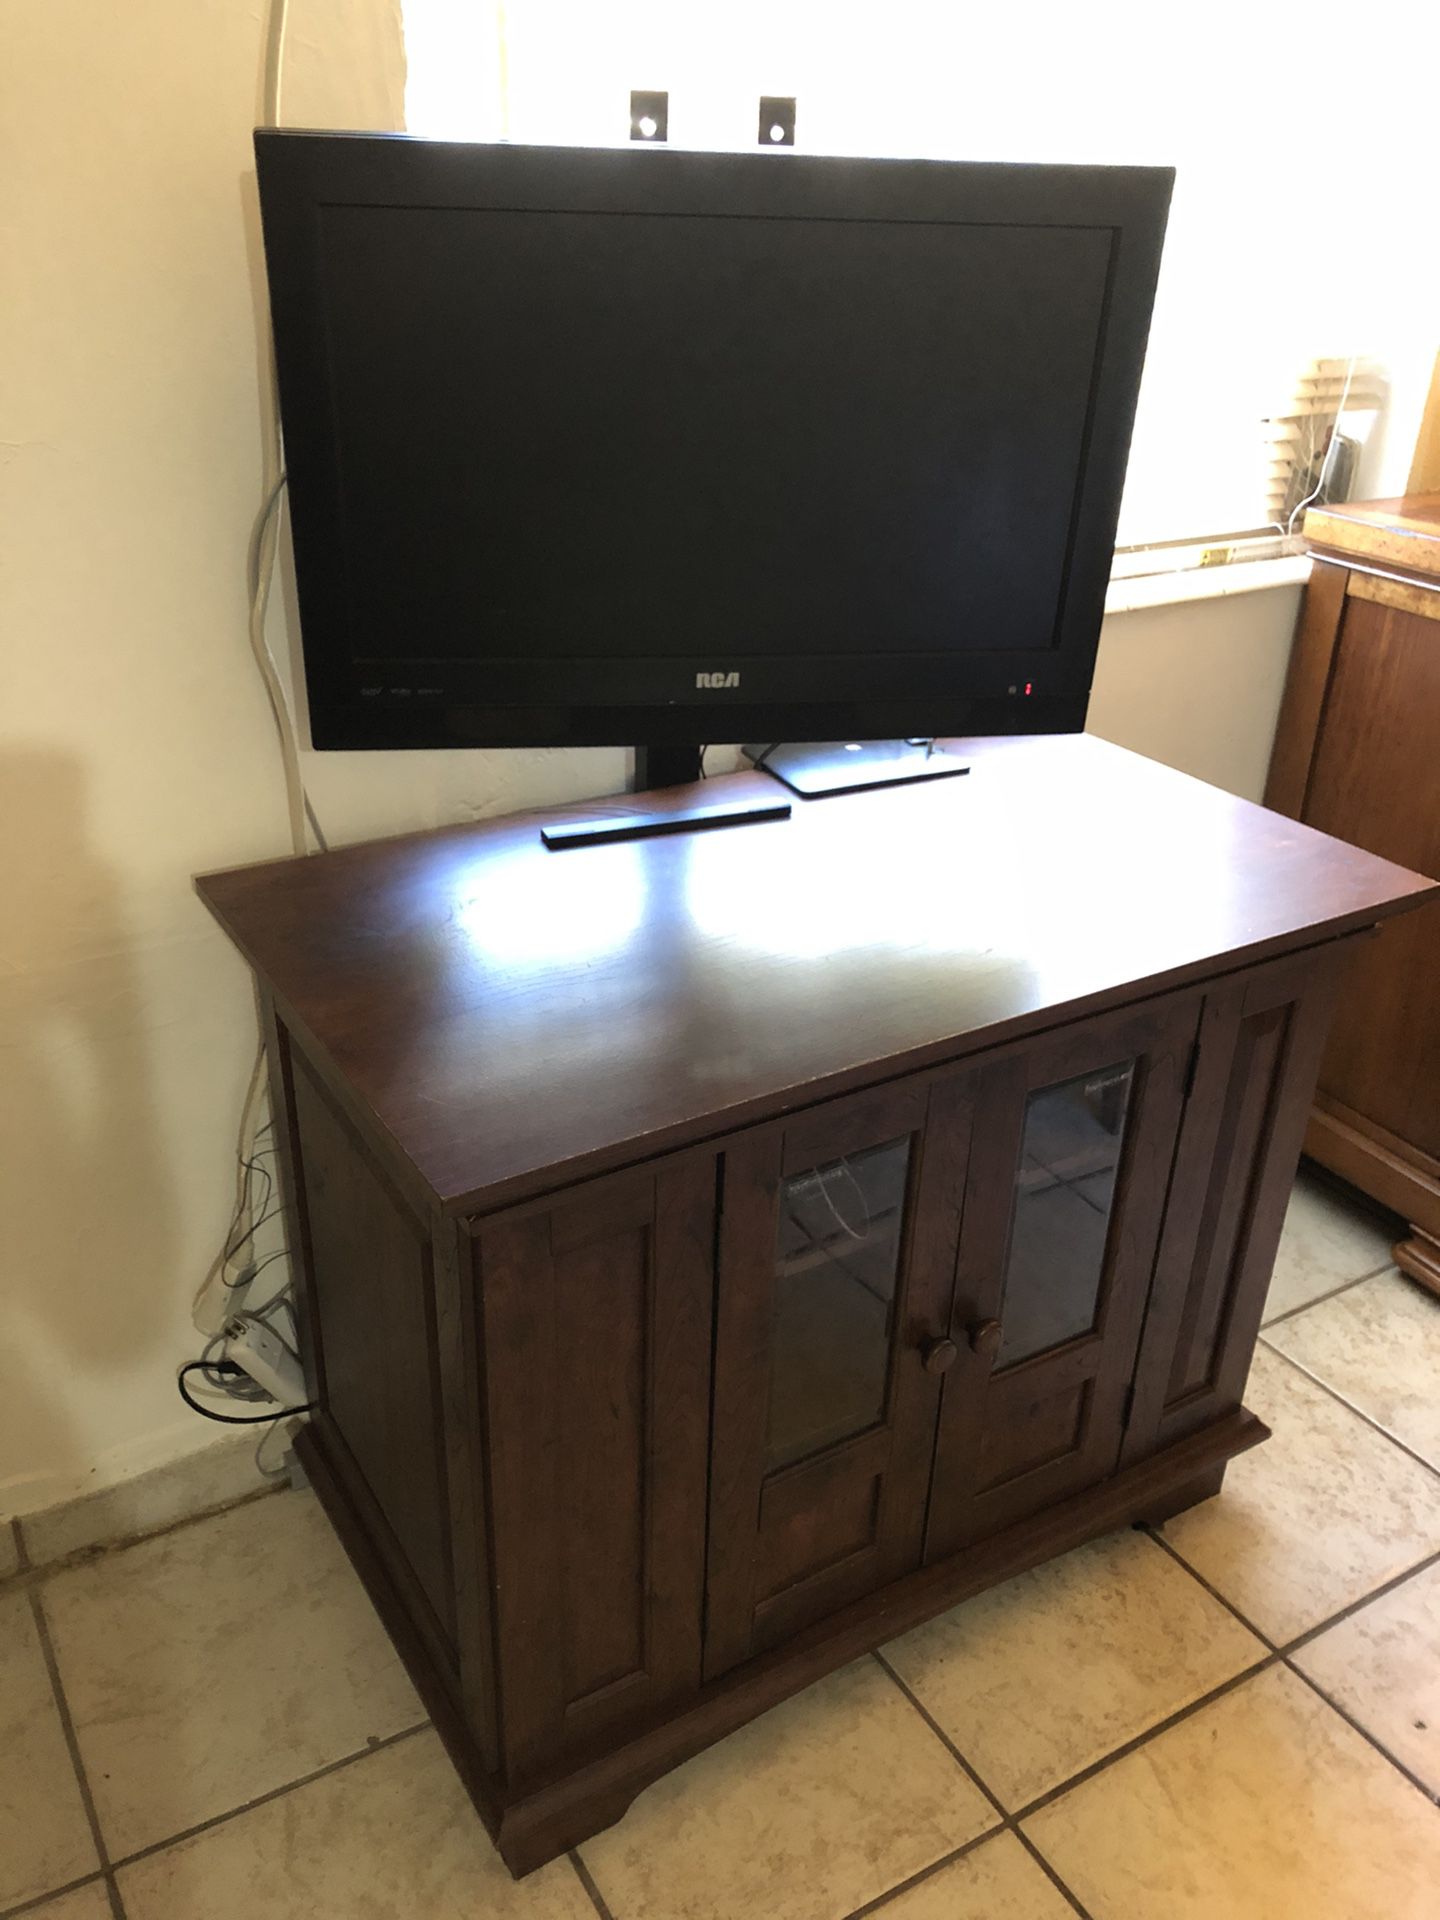 26” HDTV (RCA) has Internal DVD, comes with Cabinet Stand, 3 Shelves, 2 Hidden Compartments, Real Wood, Brown, Great Condition